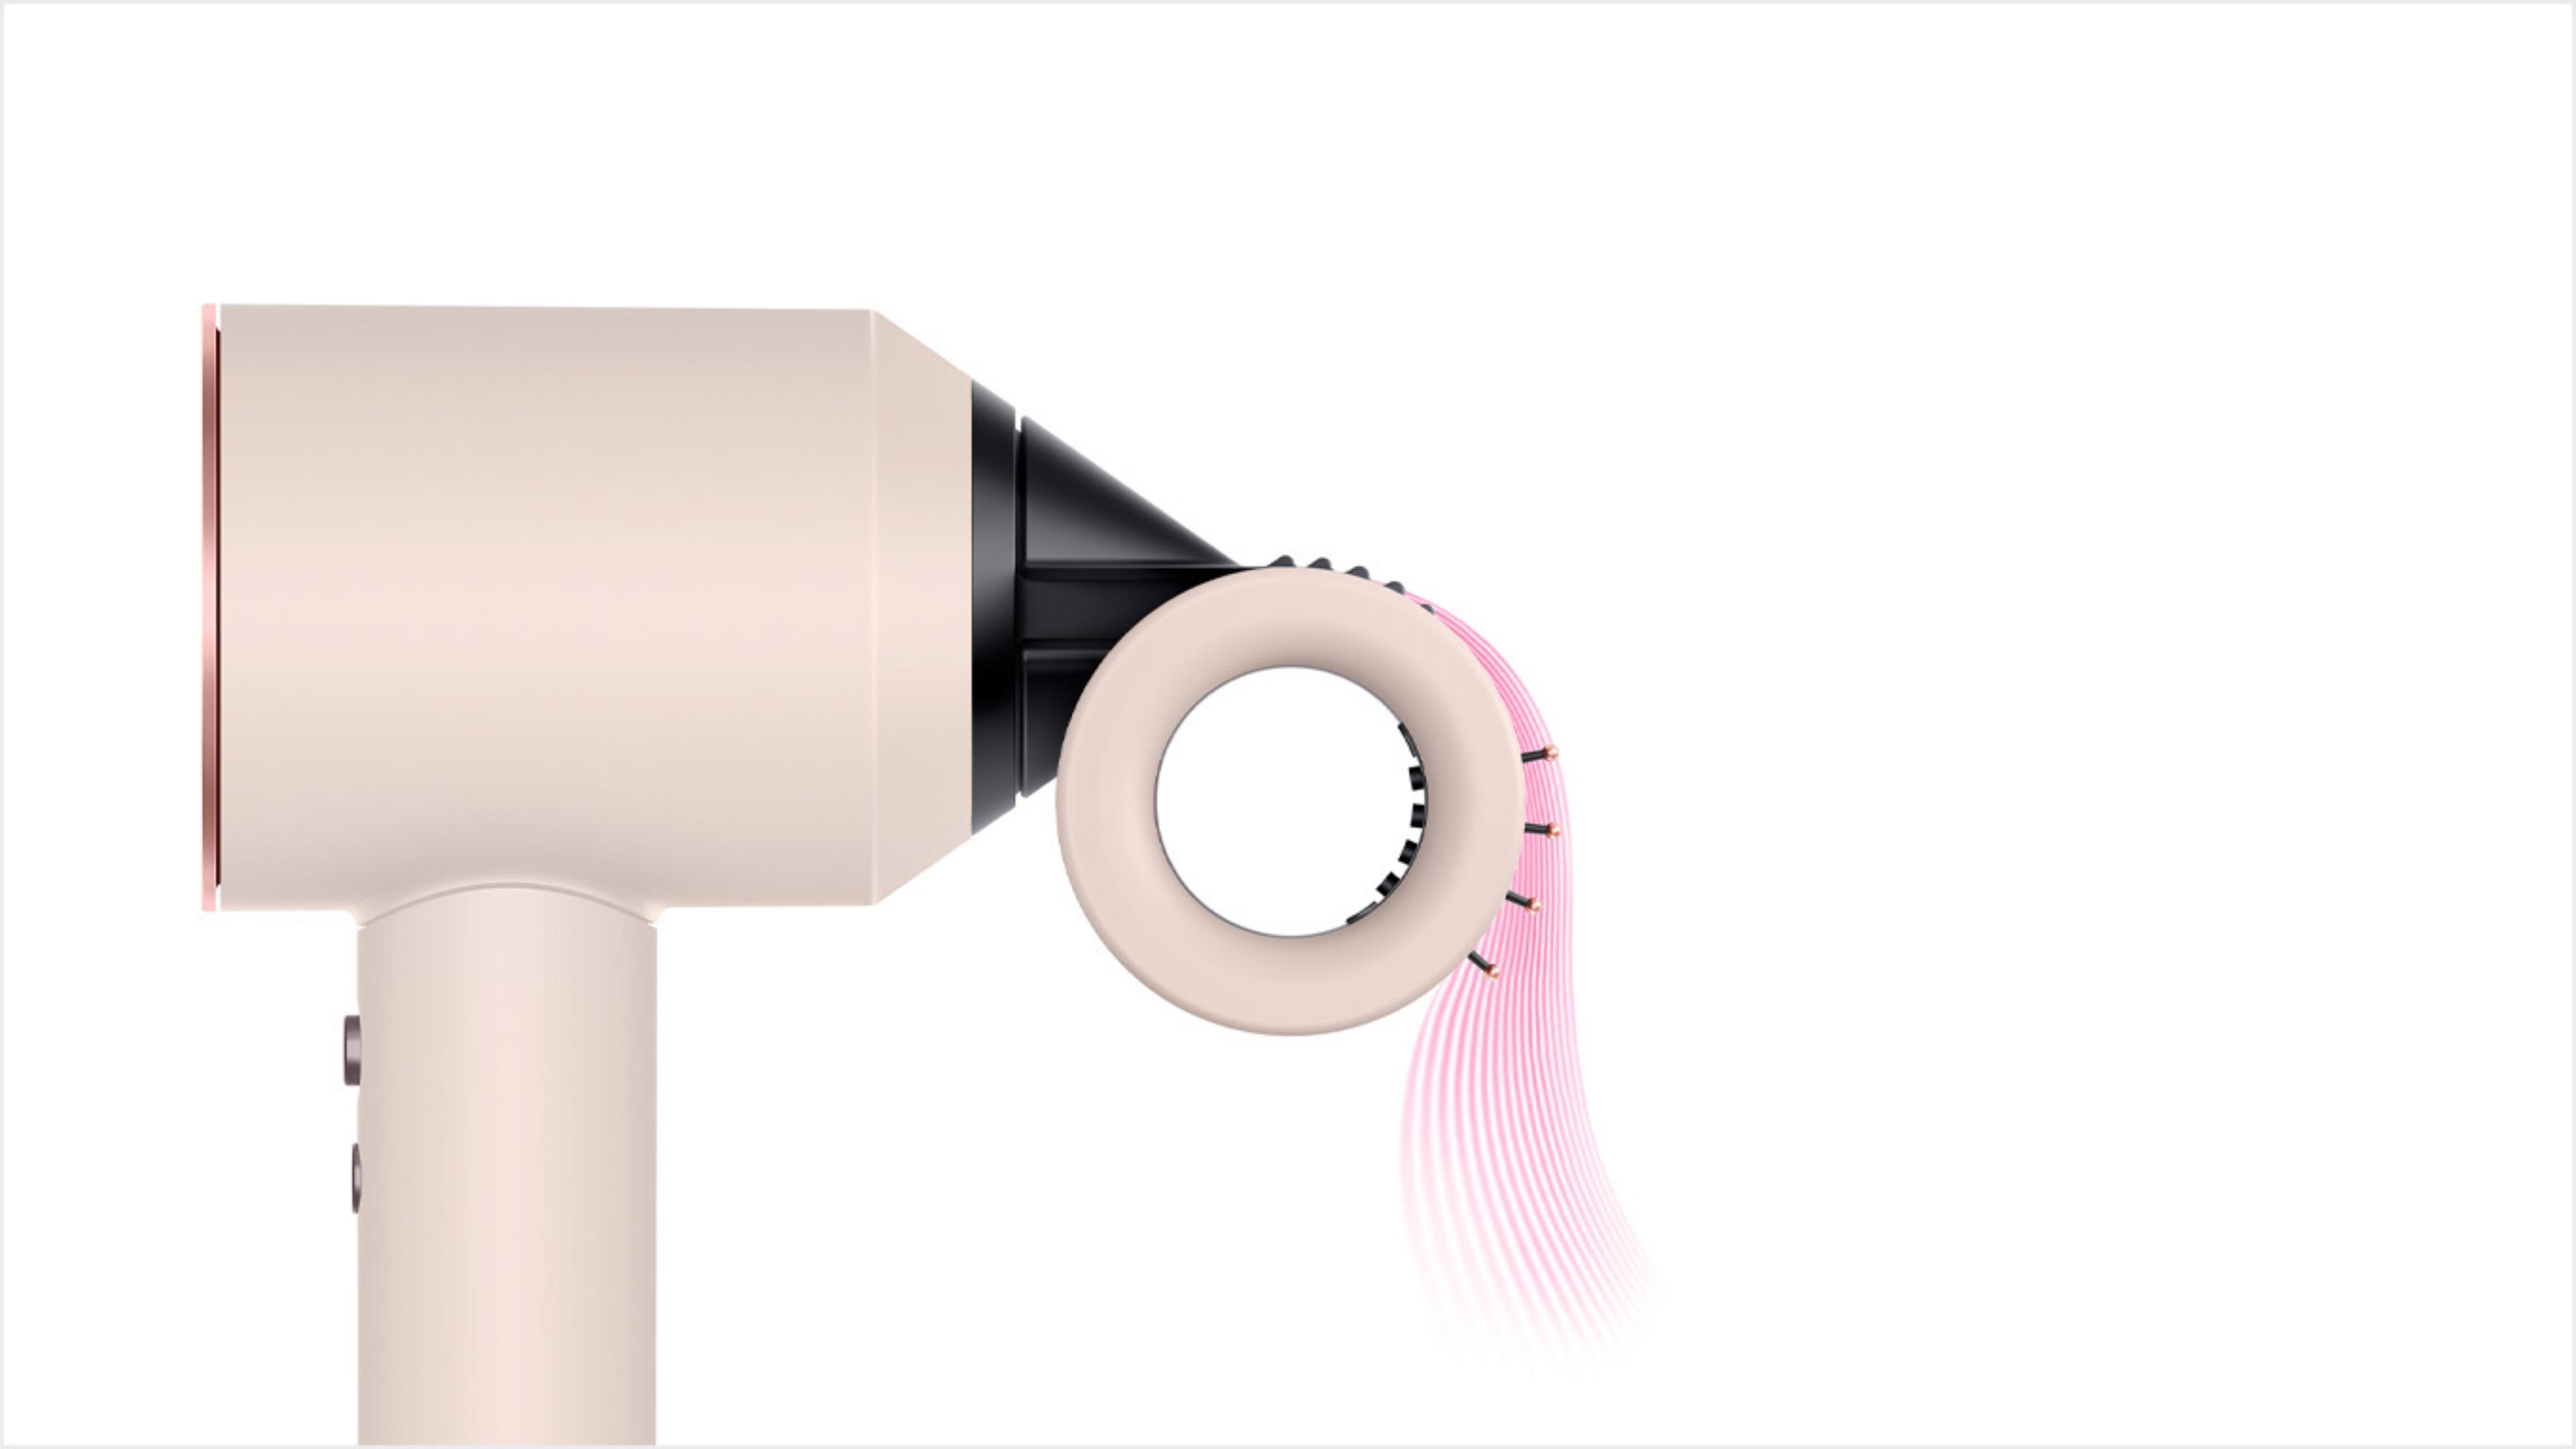 Dyson Supersonichair dryer in Ceramic pink and rose gold